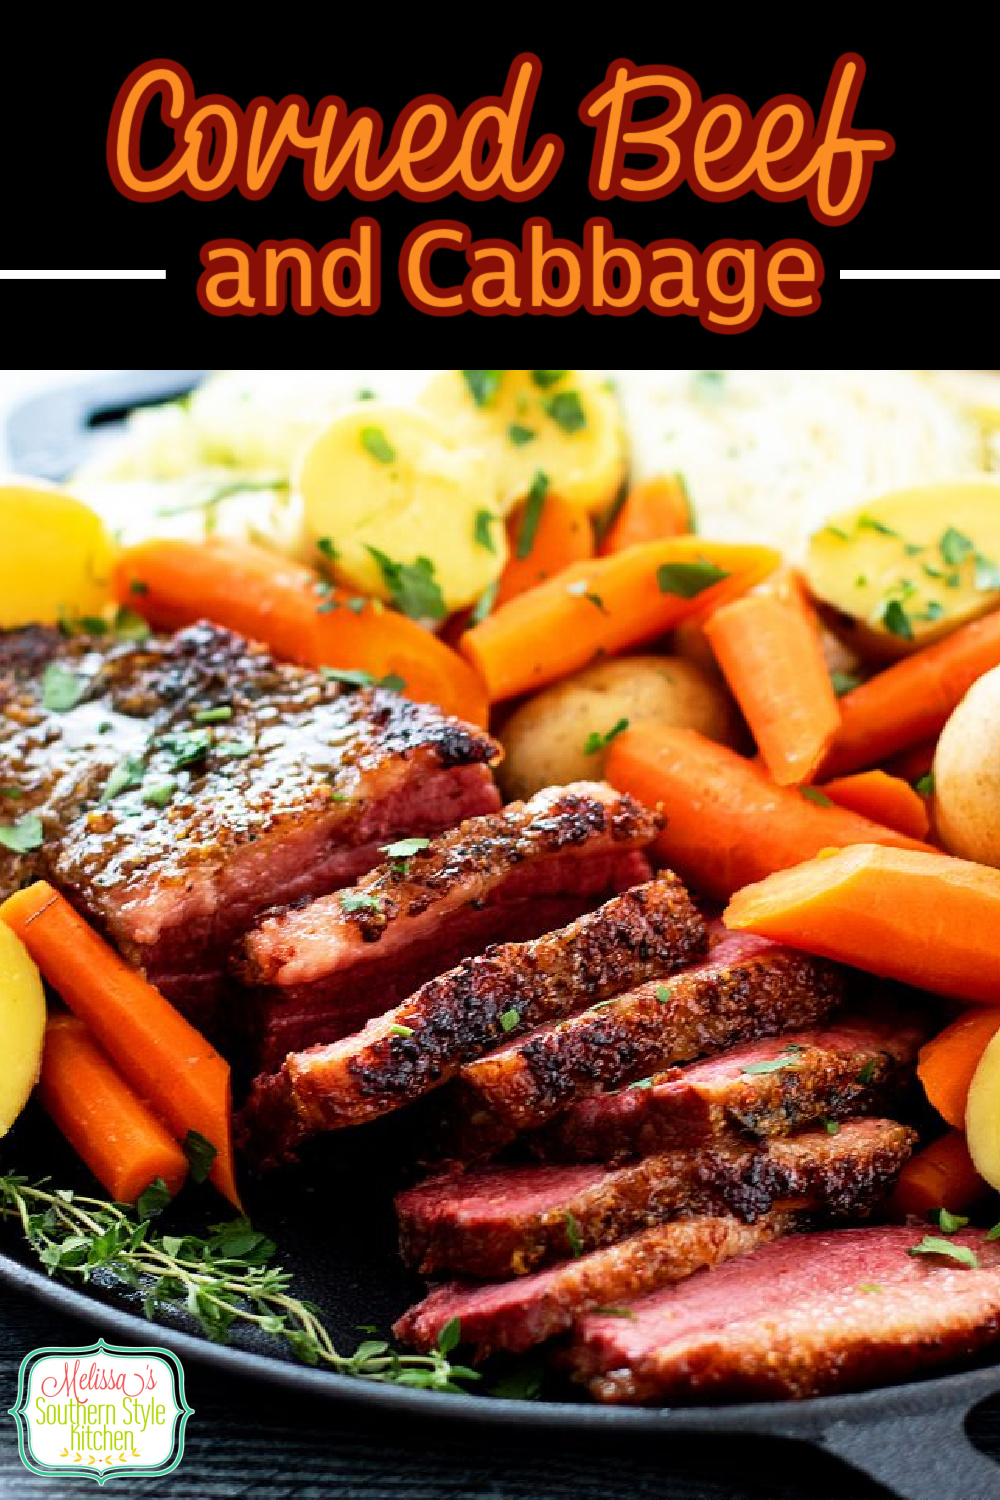 Make this mouthwatering Corned Beef and Cabbage with carrots and potatoes to complete your St Patrick's Day meal #cornedbeef #cornedbeefandcabbage #StPatricksDay #beef #beefbrisket #southernrecipes #cabbage #cornedbeefandcabbage